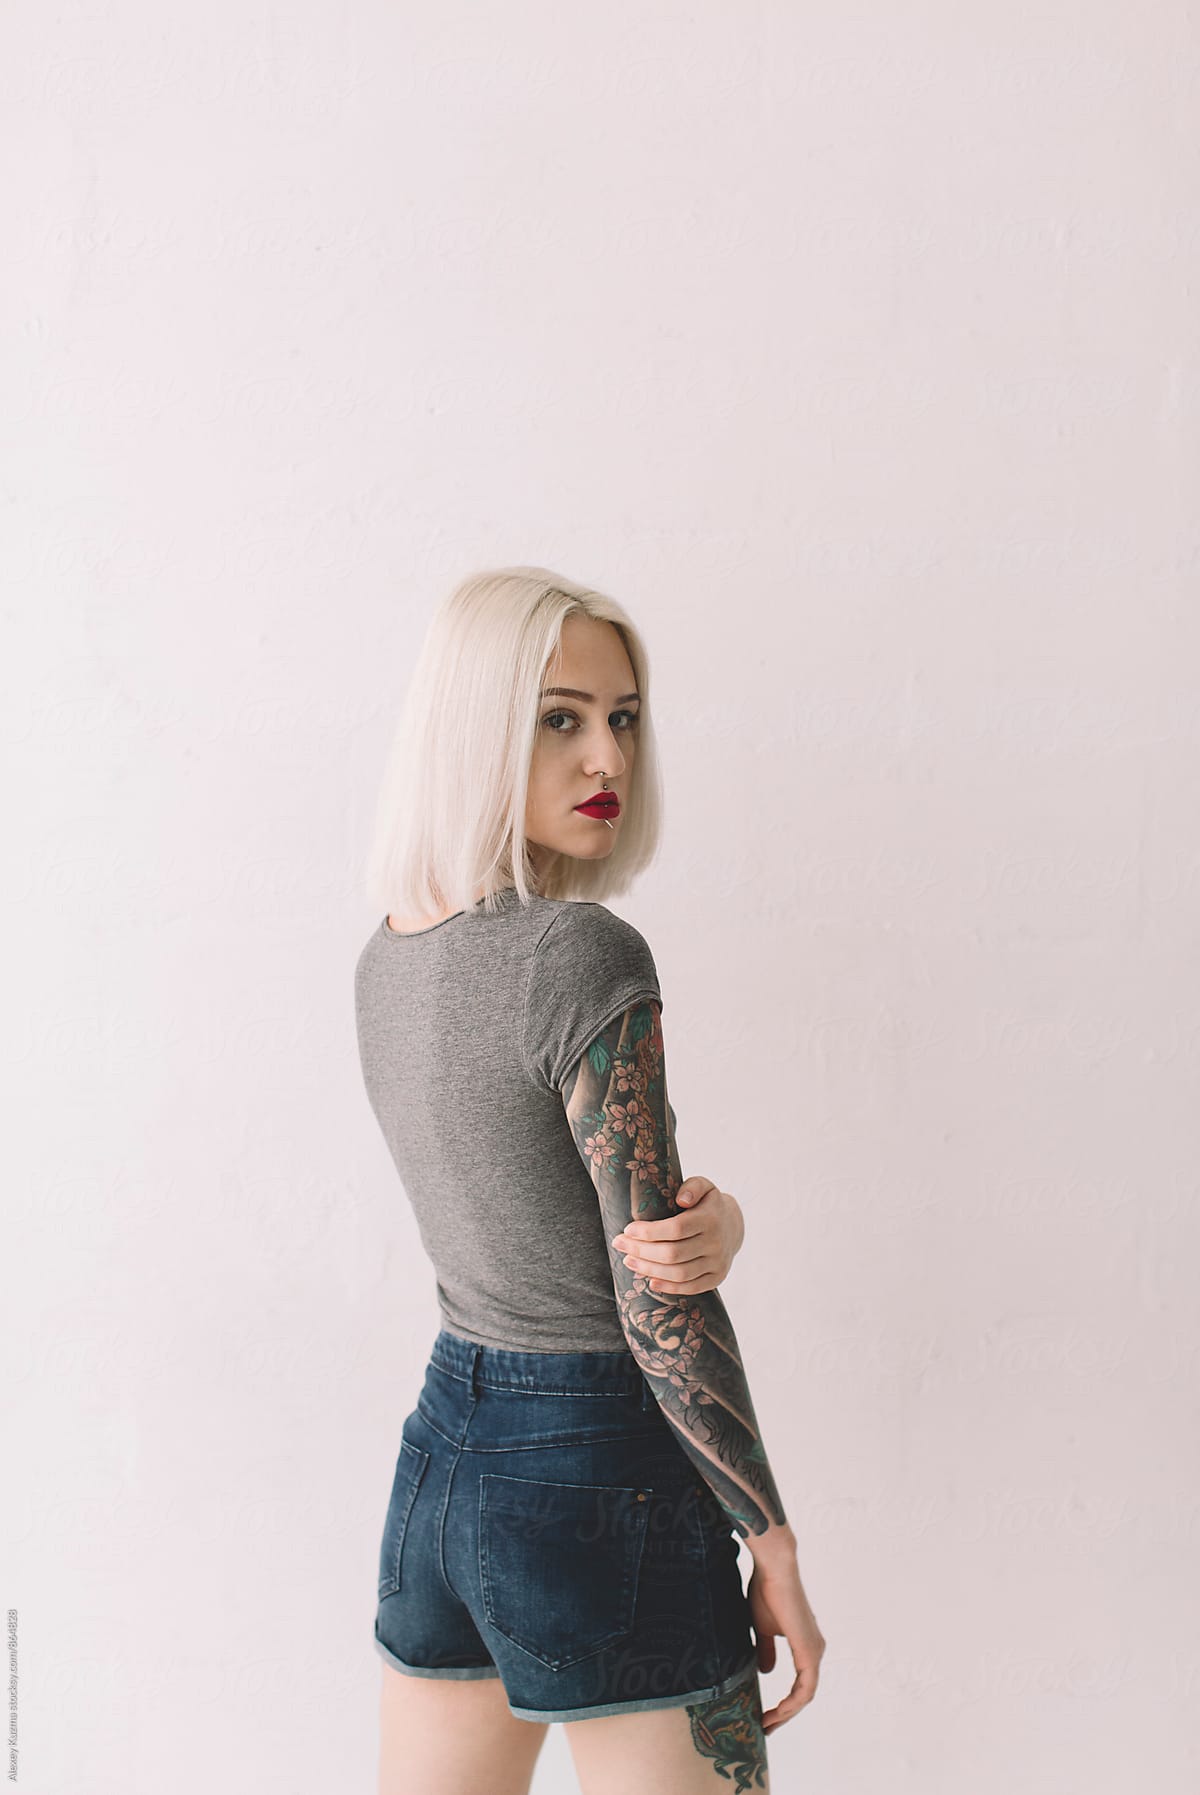 portrait of young blond woman with tattoos on the white background